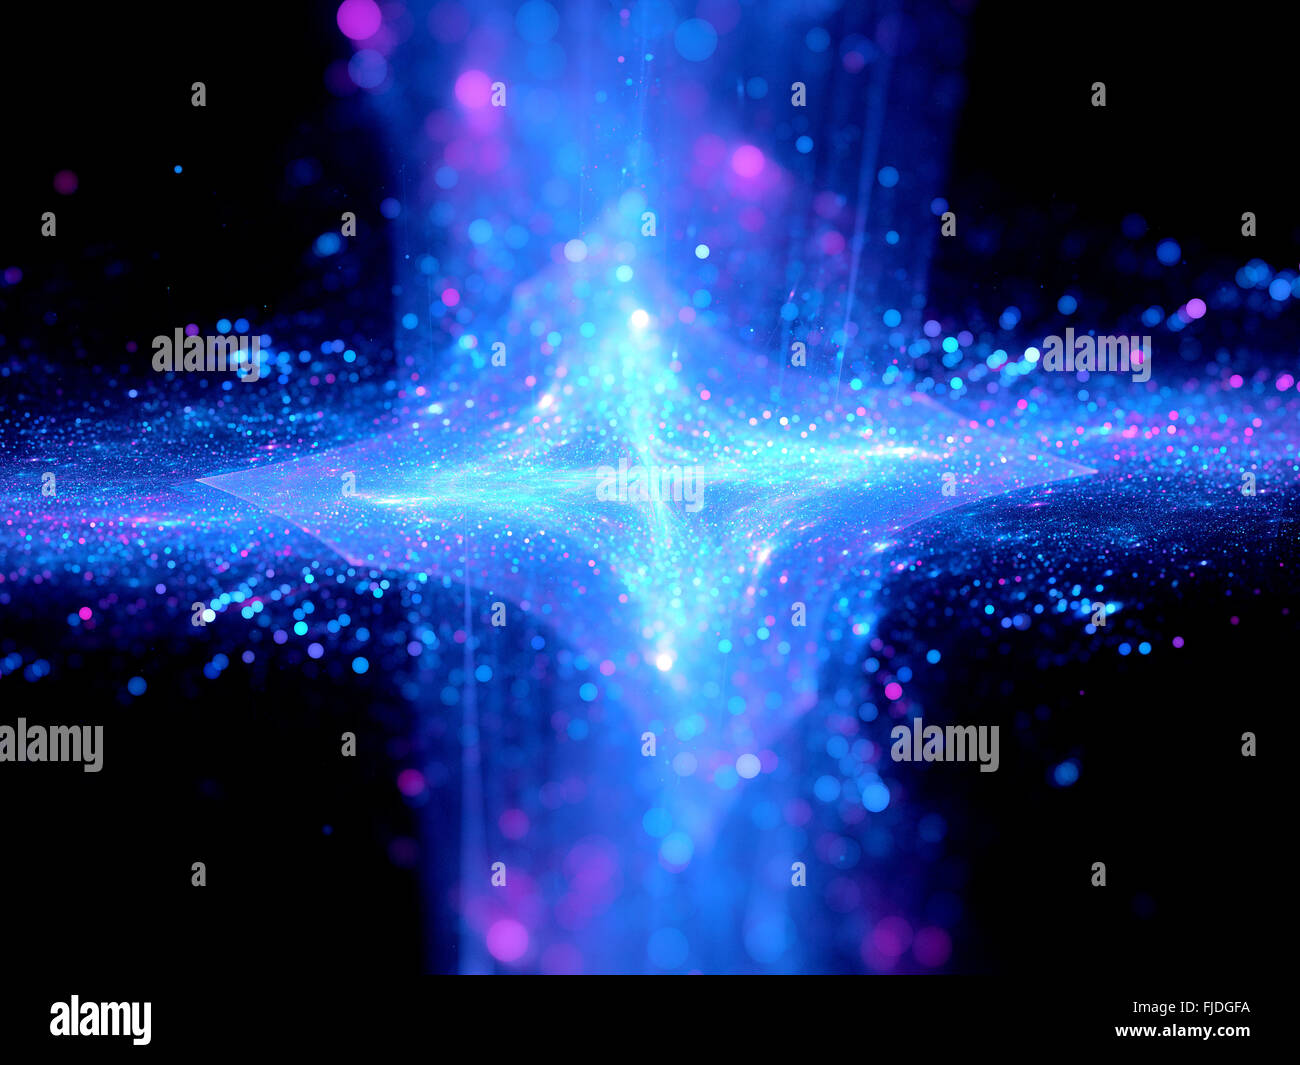 Colorful explosion with particles, computer generated abstract background Stock Photo